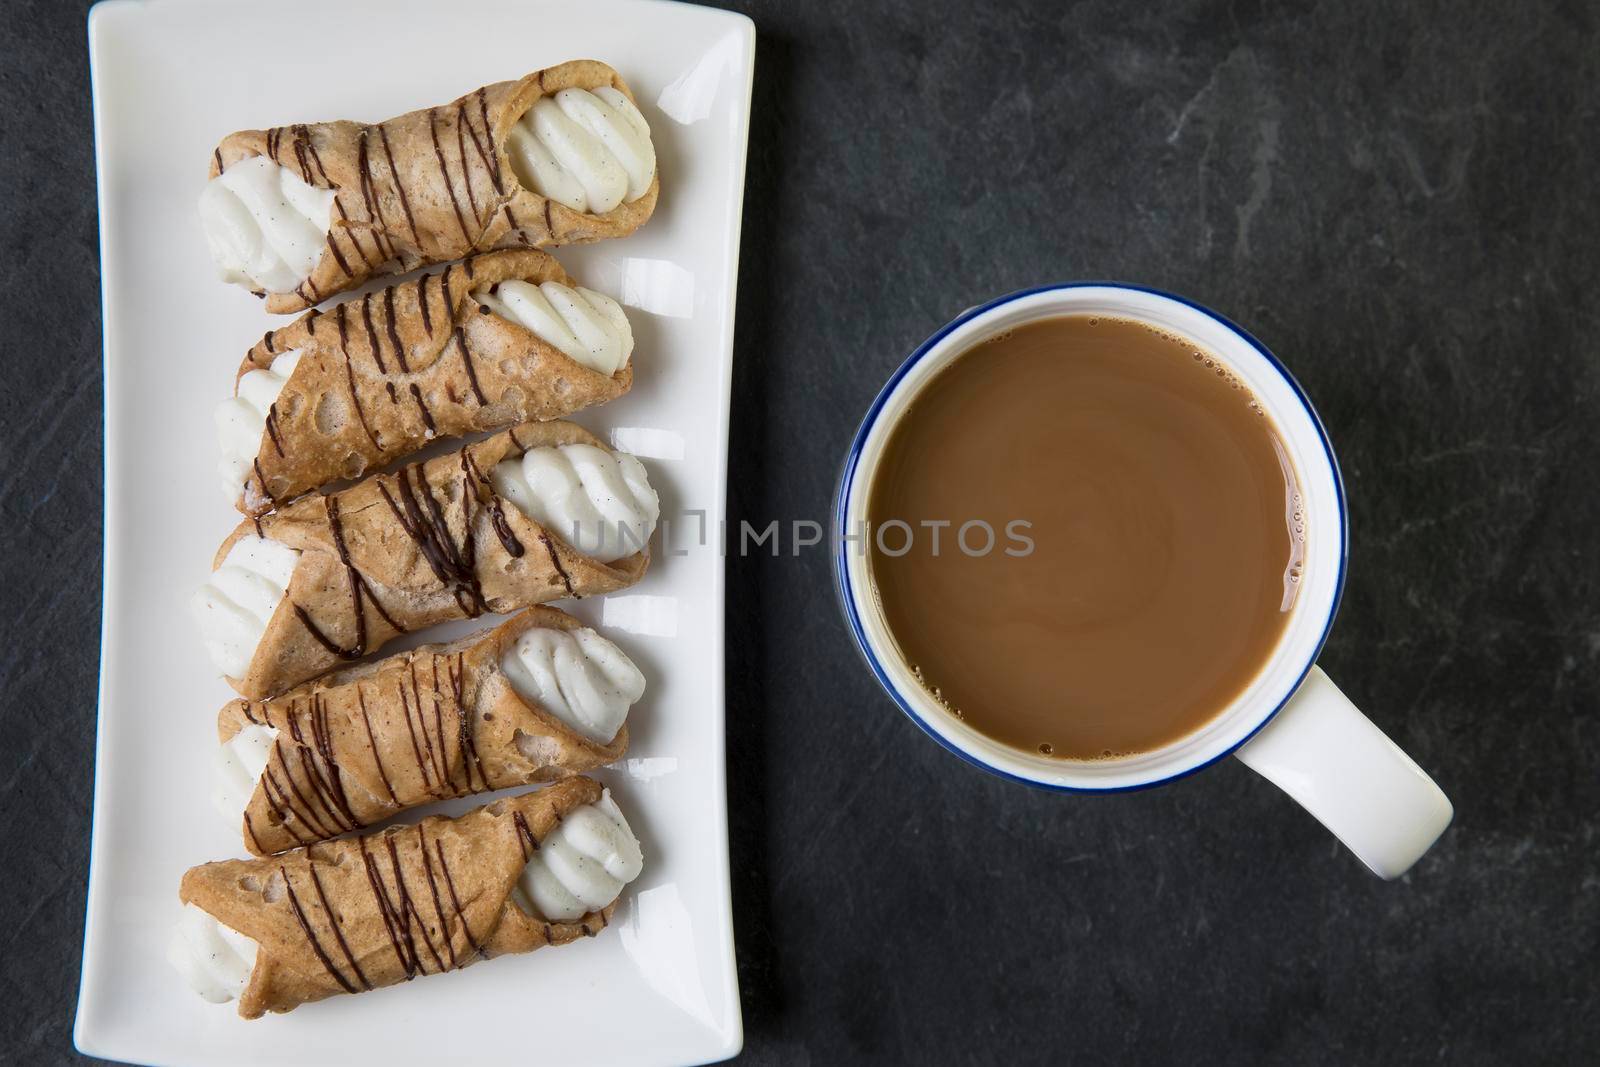 Pastries Stuffed with sweet cream and drizzled with chocolate and a cup of tea or coffee, viewed from above.